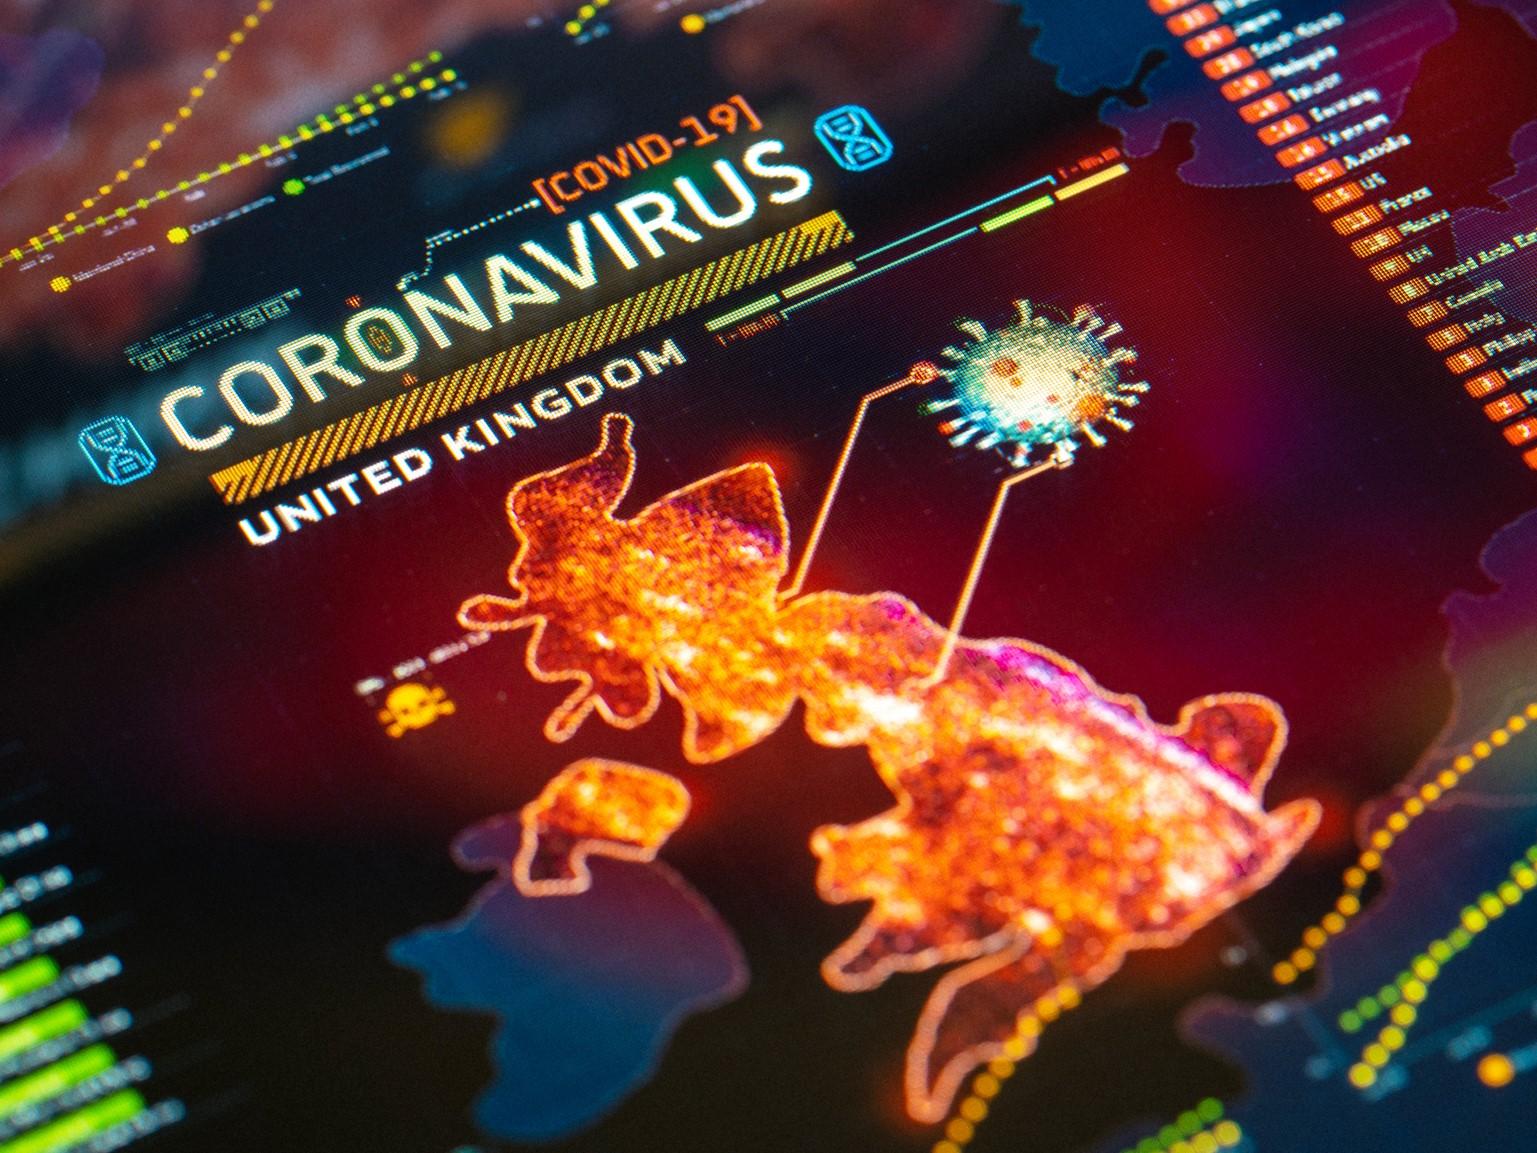 The UK had the second slowest response to the coronavirus pandemic, behind Sweden